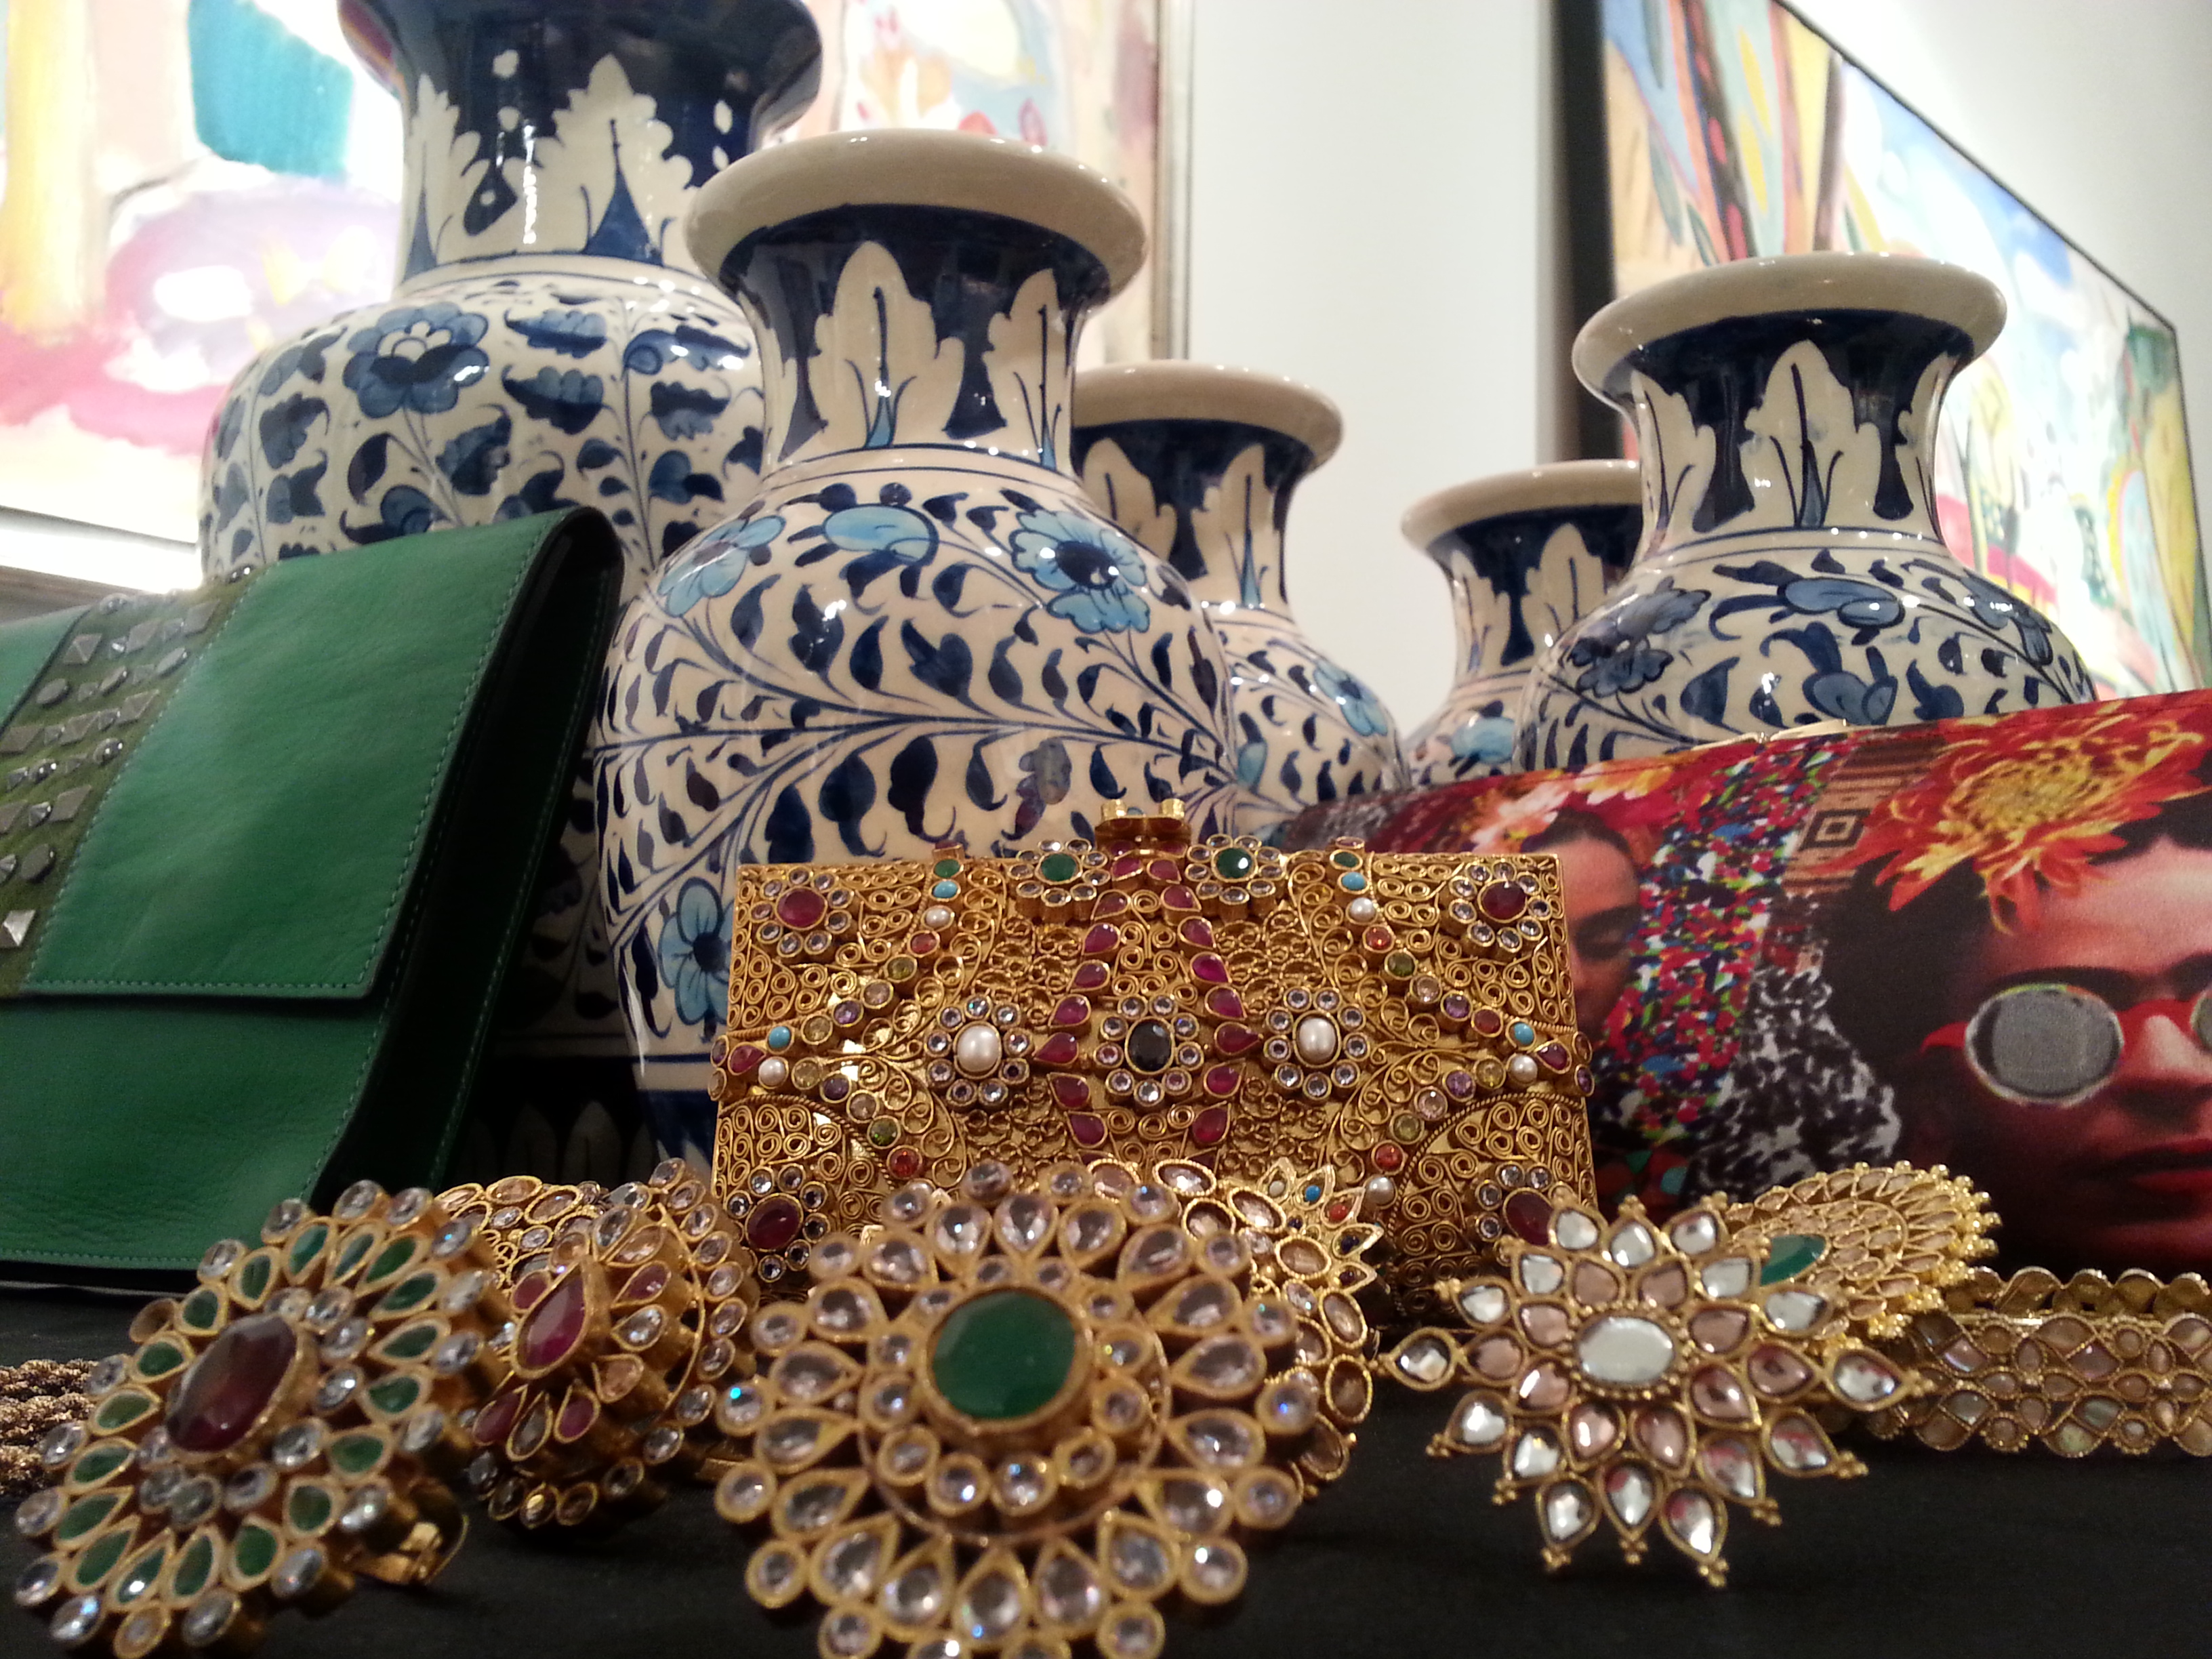 Victoria Road Pop Up Exhibits Pakistan… To Purchase!